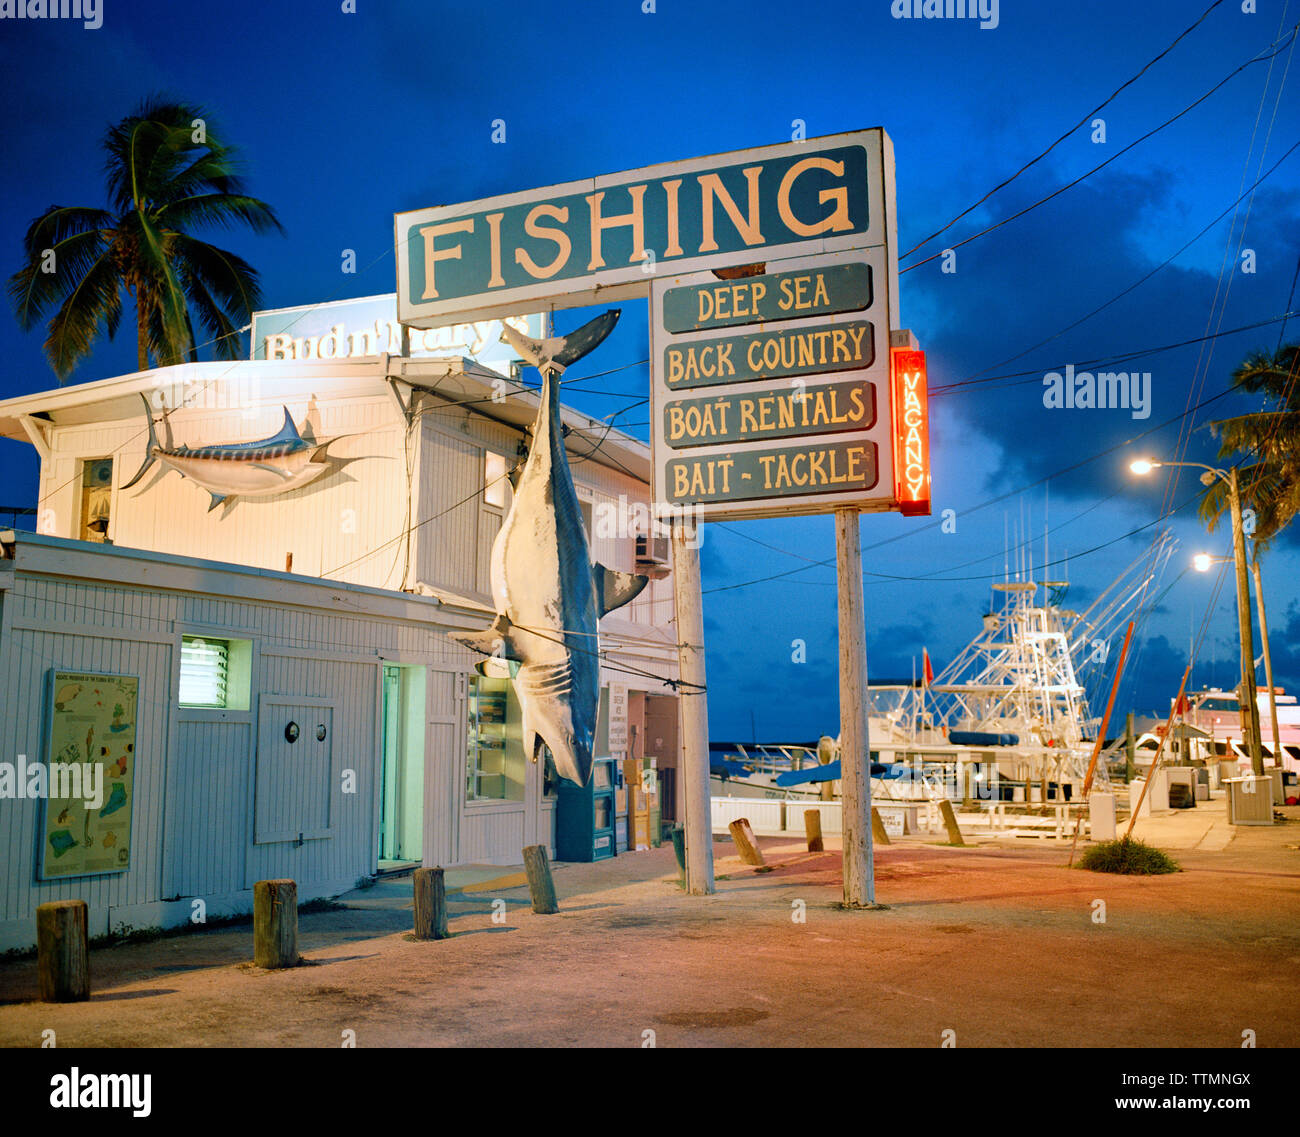 USA, Florida, fishing bait and tackle store at dusk, Bud N' Mary's